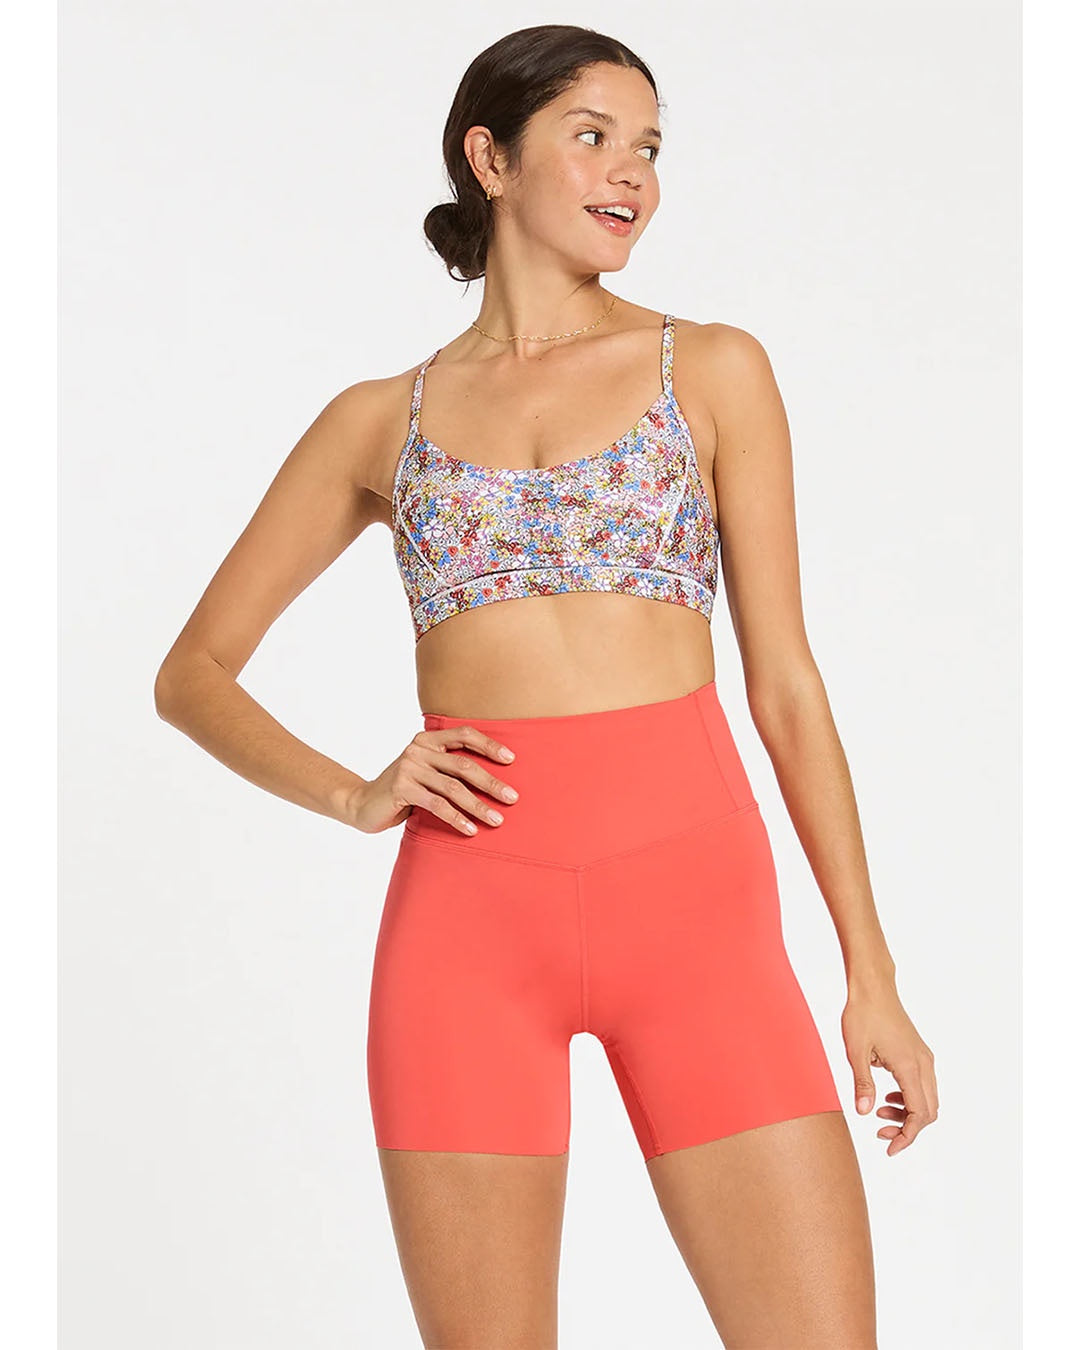 Barely There Bralette - Forget Me Not Floral Sports Bras &amp; Crops by Nimble - Prae Store